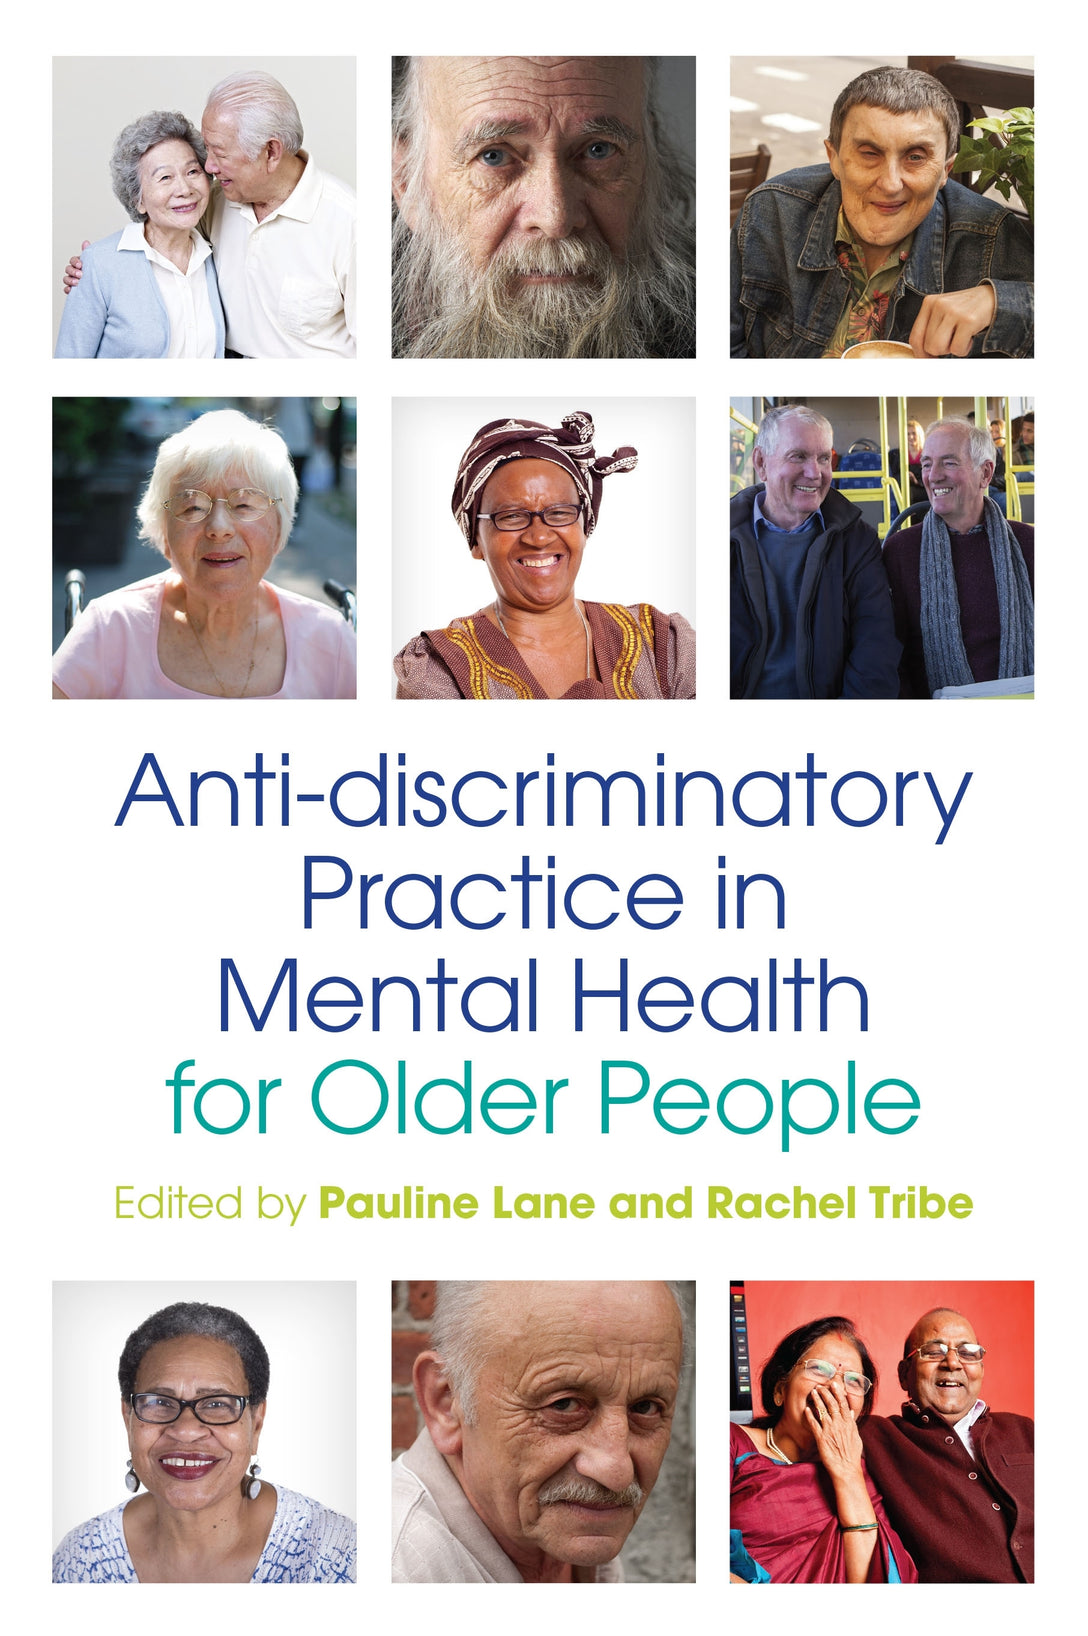 Anti-discriminatory Practice in Mental Health Care for Older People by Pauline Lane, Rachel Tribe, No Author Listed